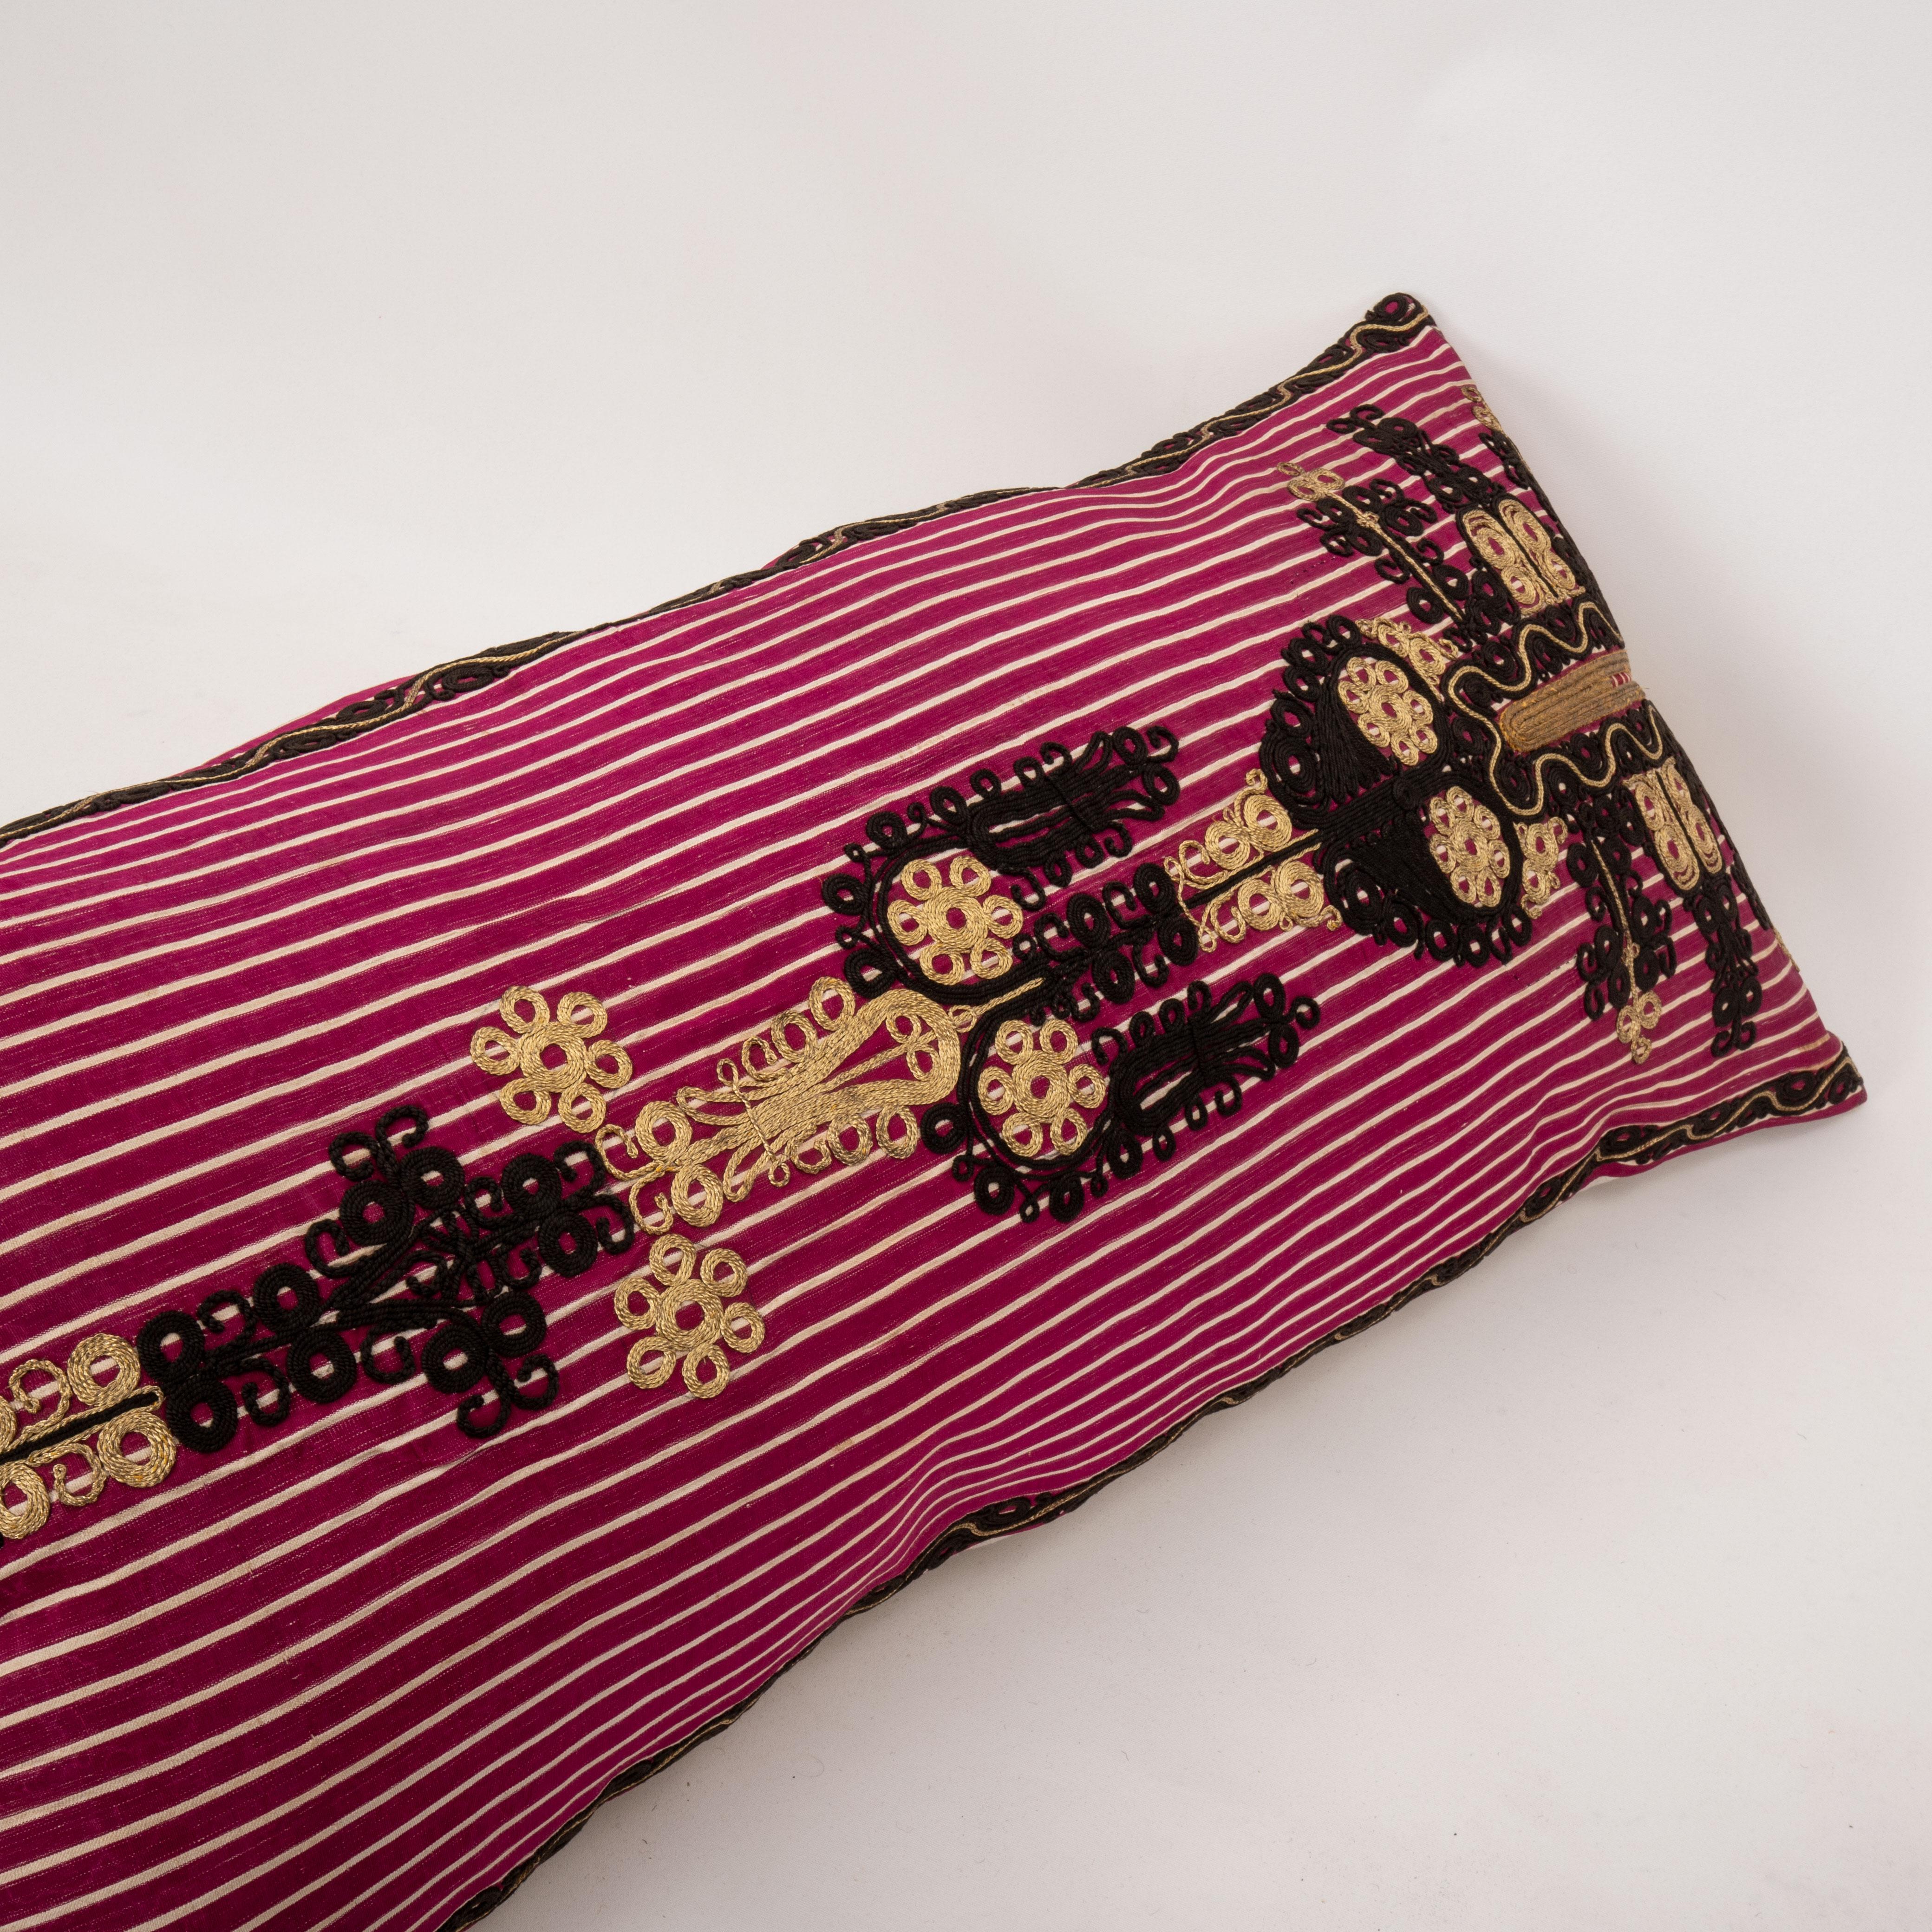 Metallic Thread Antique Ottoman Turkish Pillow Case, Early 20th C. For Sale